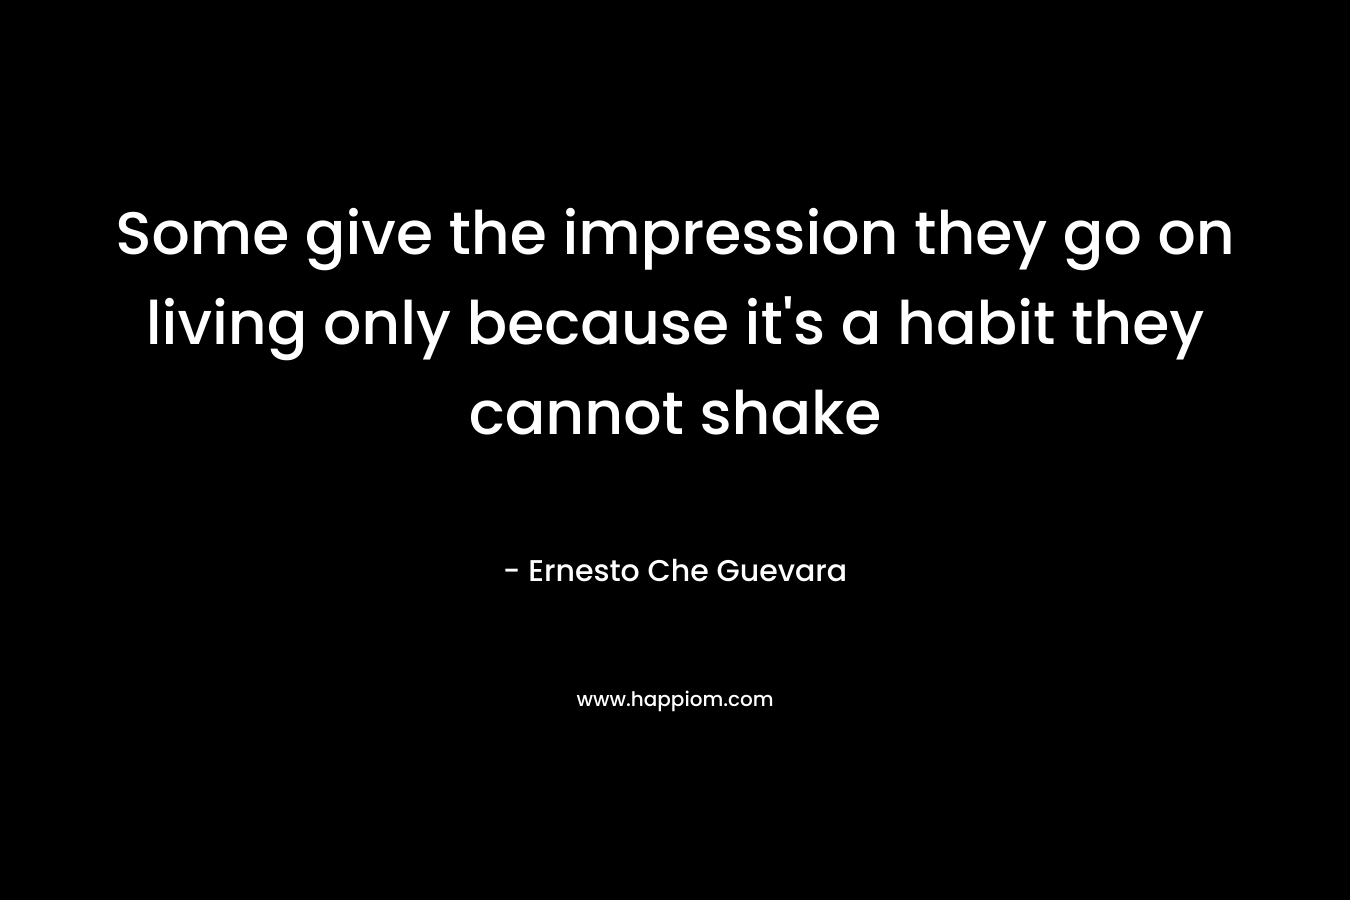 Some give the impression they go on living only because it’s a habit they cannot shake – Ernesto Che Guevara